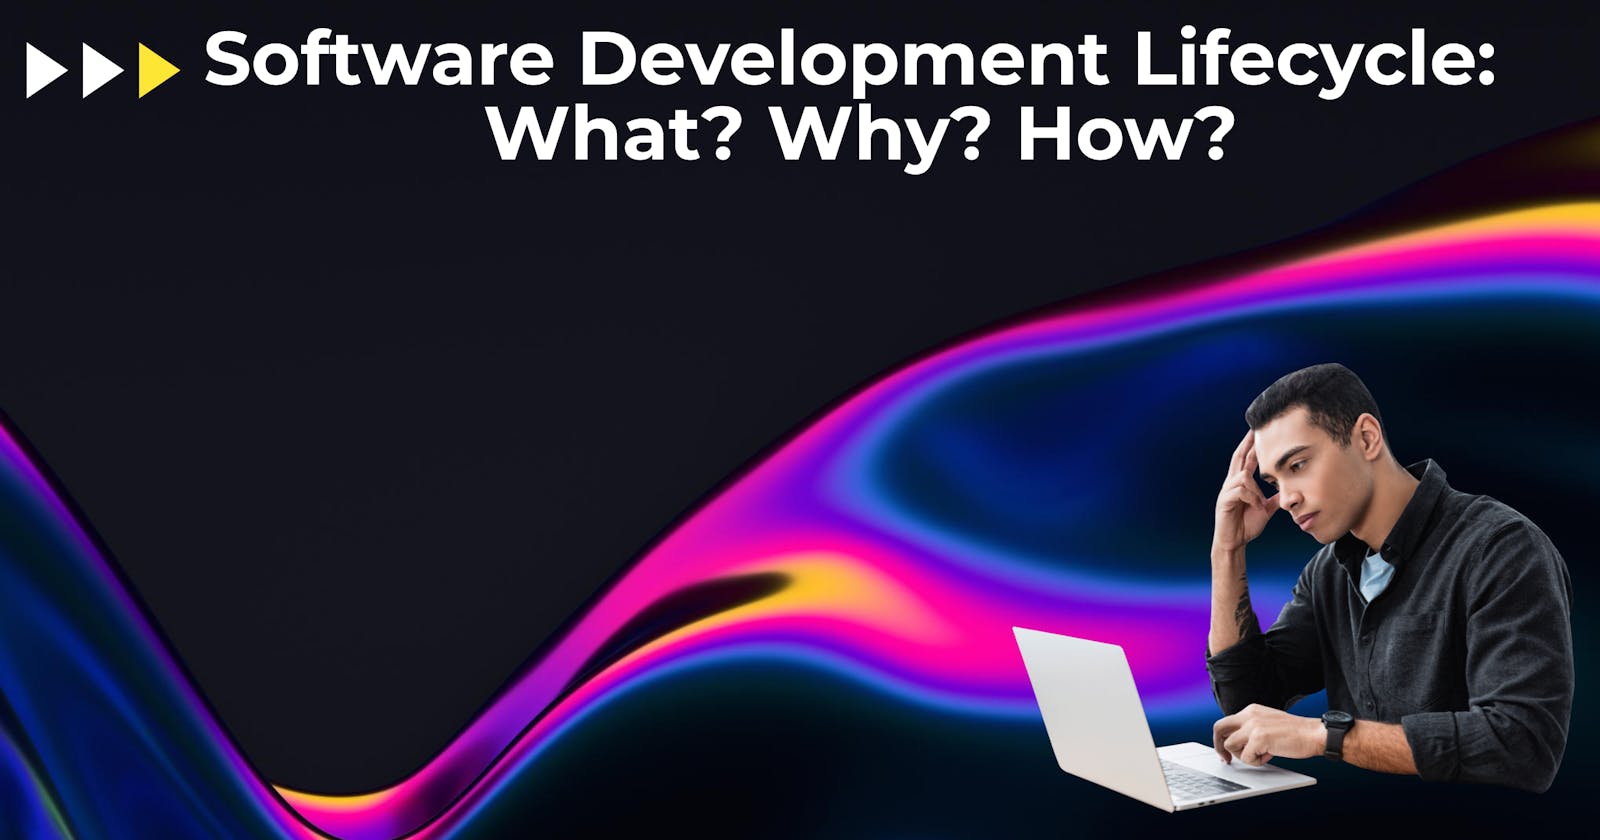 Software Development Lifecycle: What? Why? How?